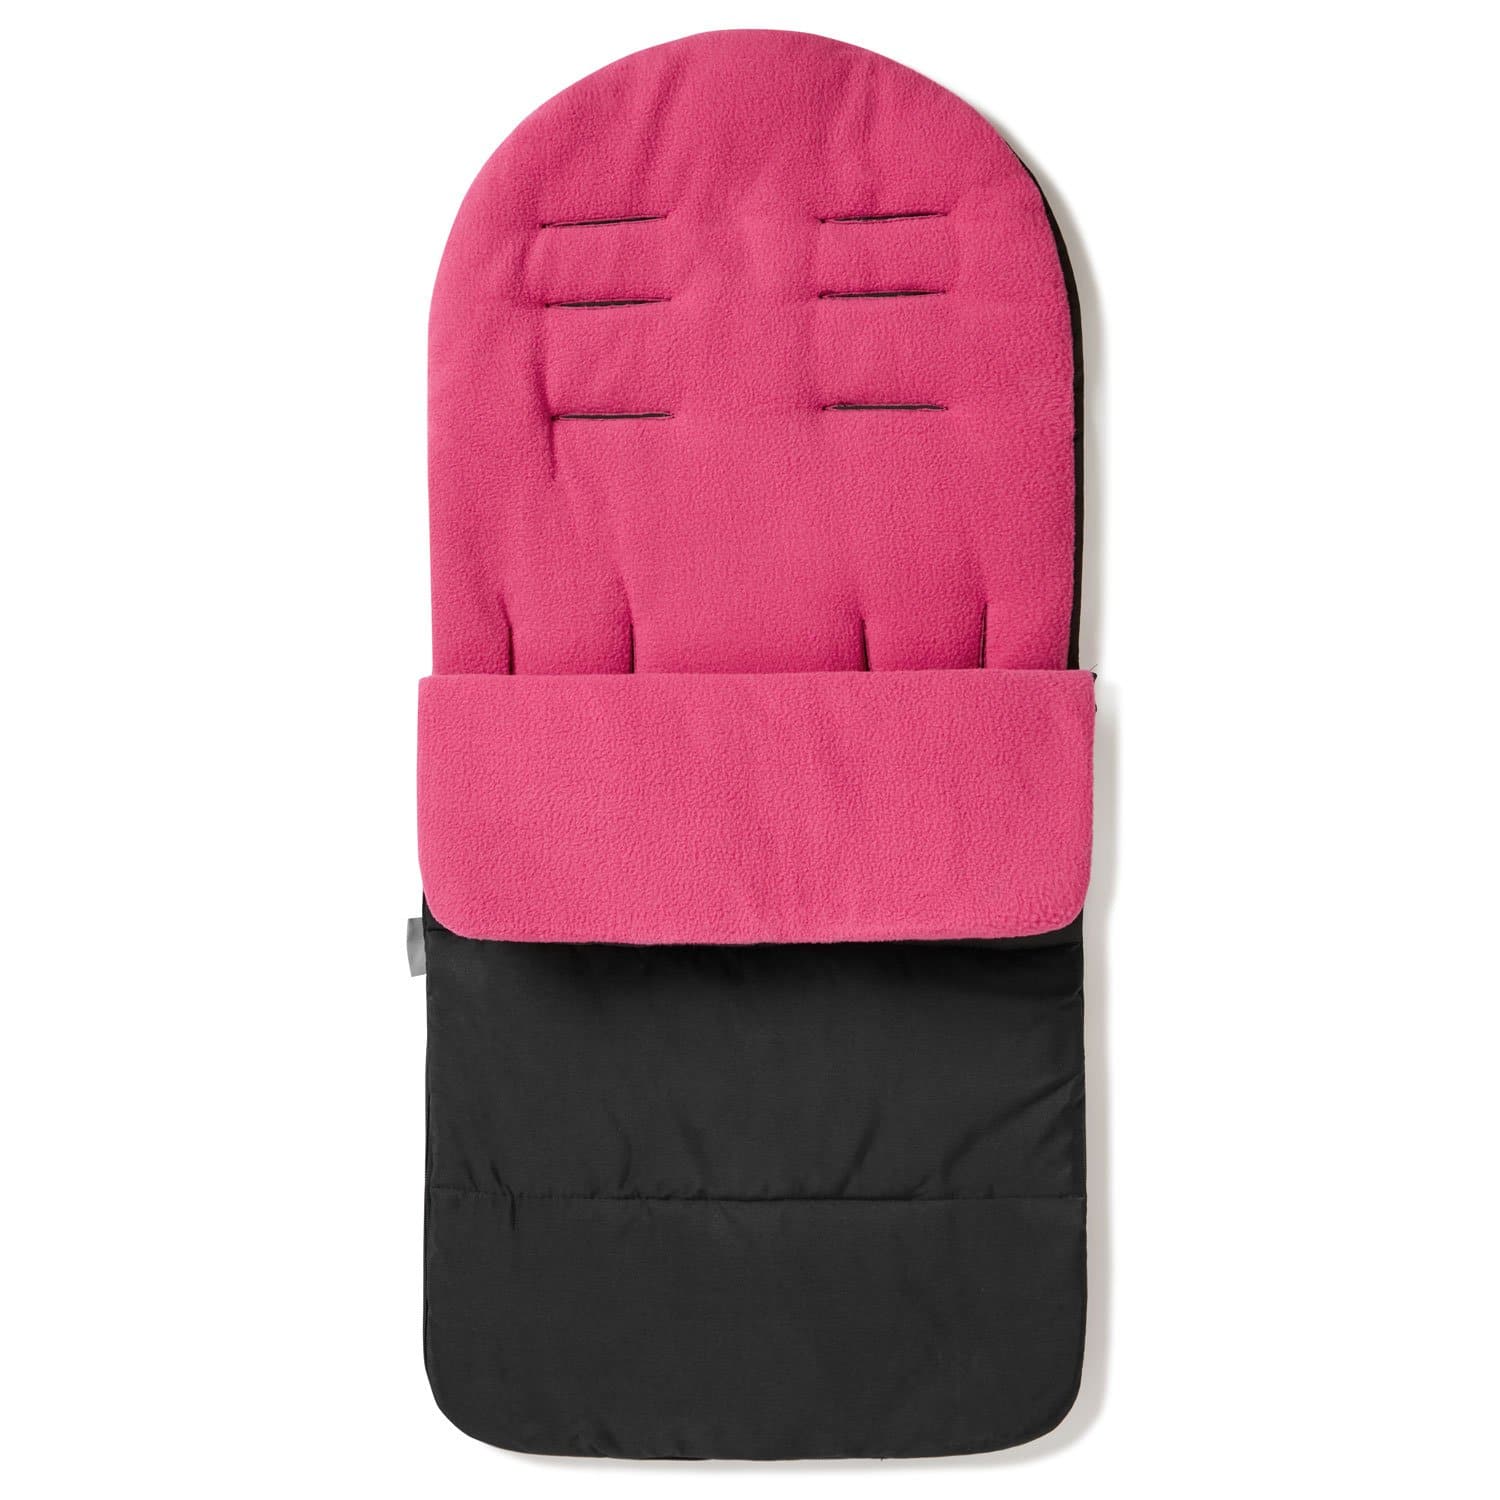 Premium Footmuff / Cosy Toes Compatible with Diono - Pink Rose / Fits All Models | For Your Little One